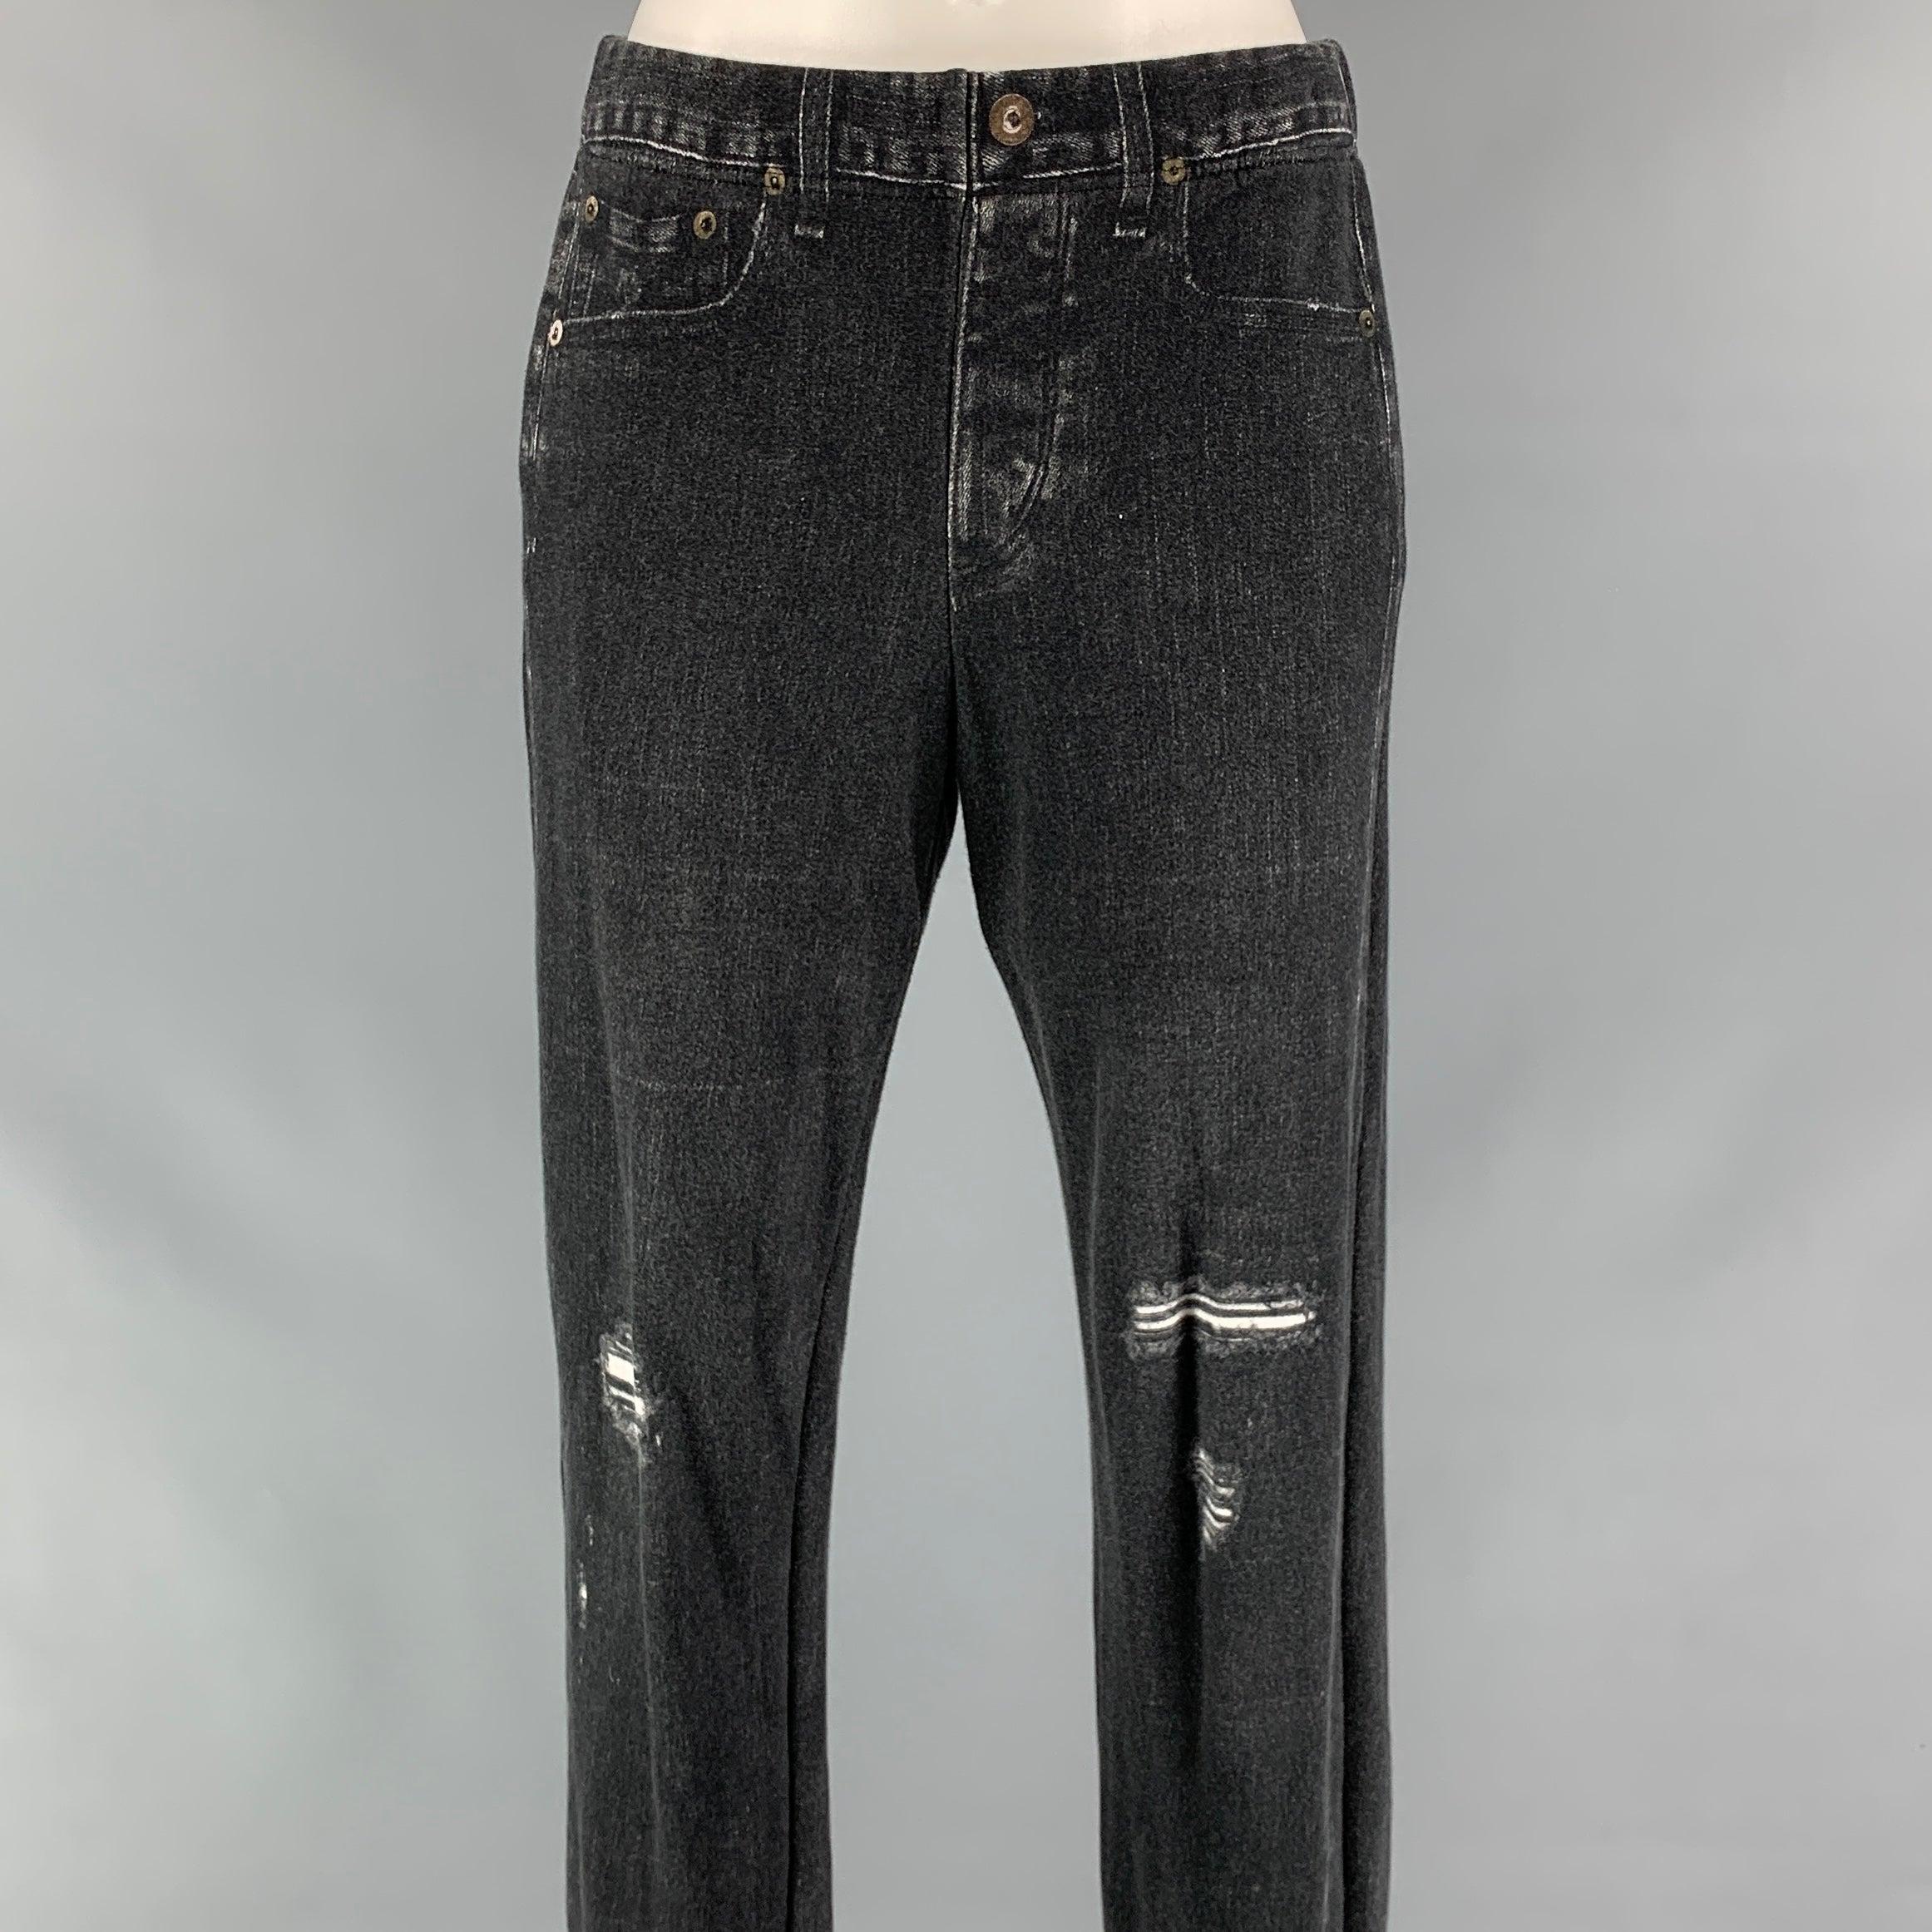 RAG & BONE casual pants comes in a charcoal grey cotton with a 